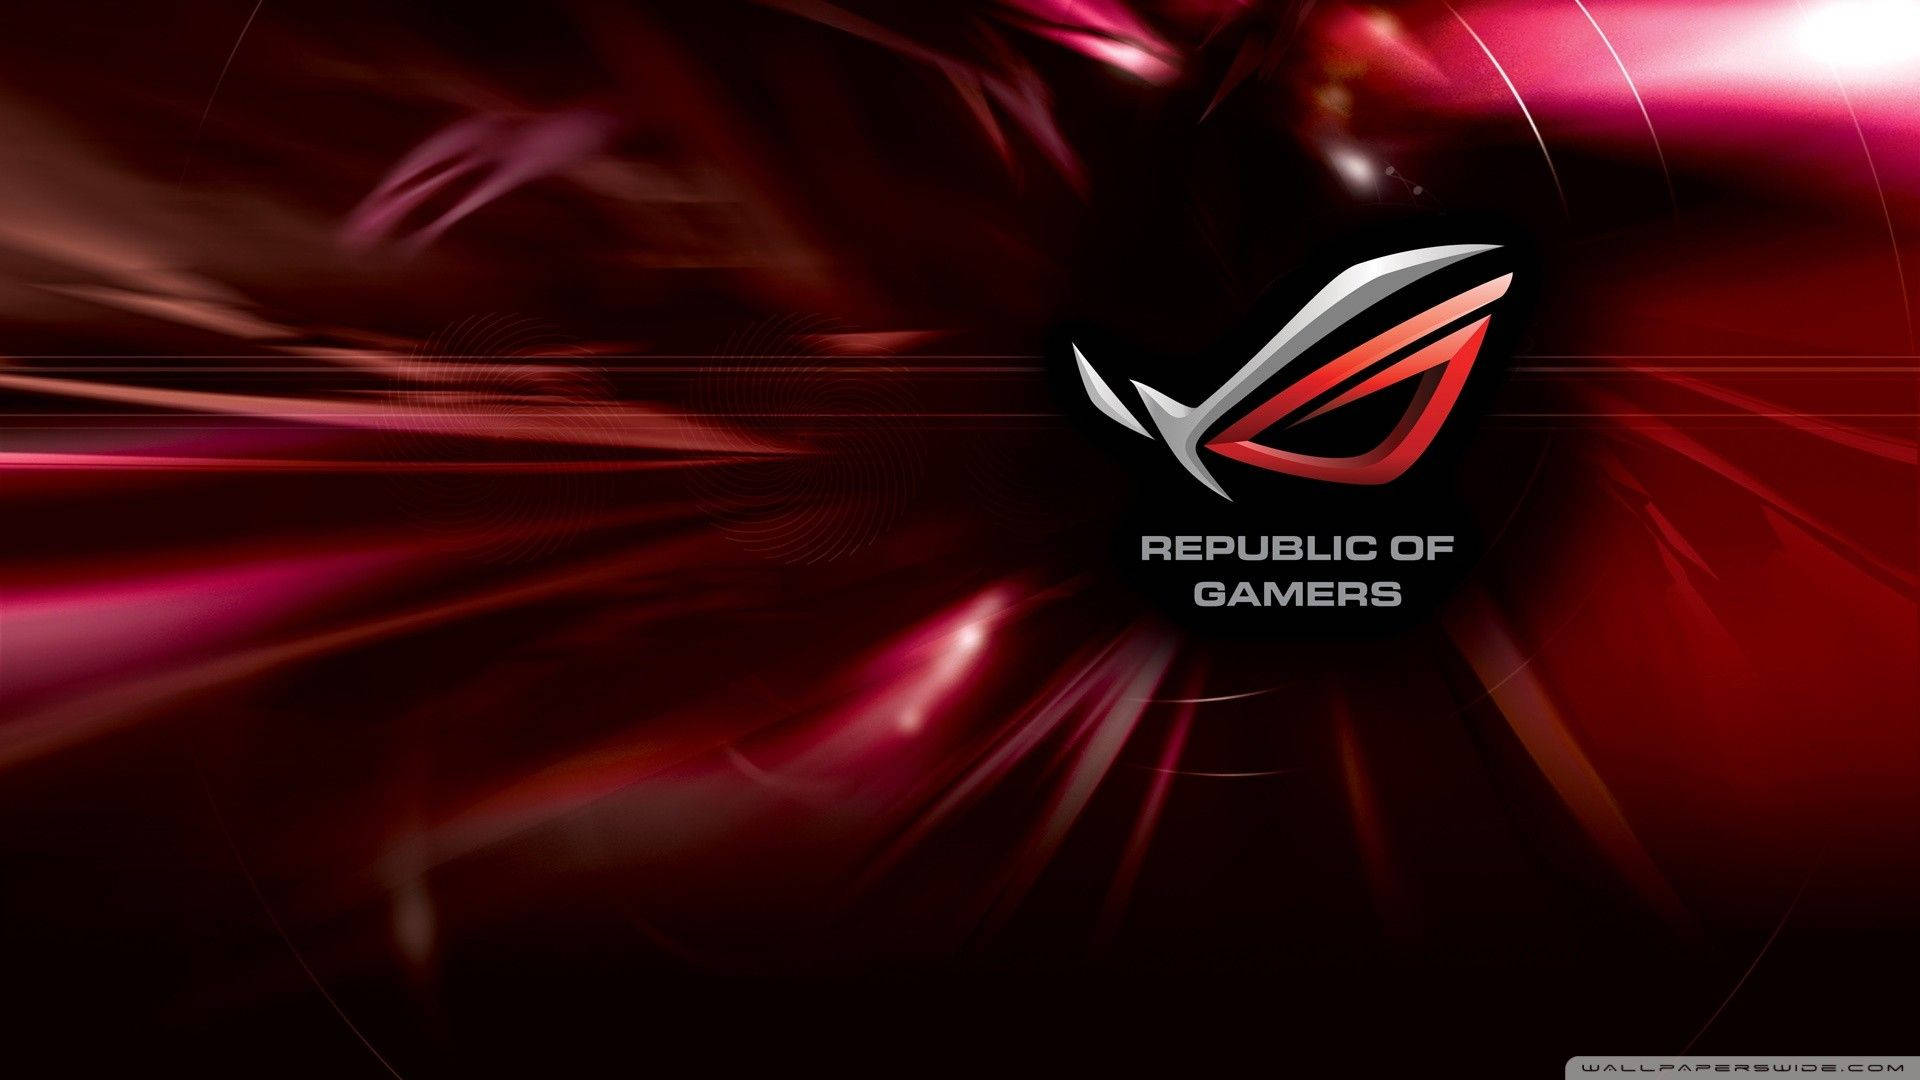 Asus Rog On Wavy Surface Background